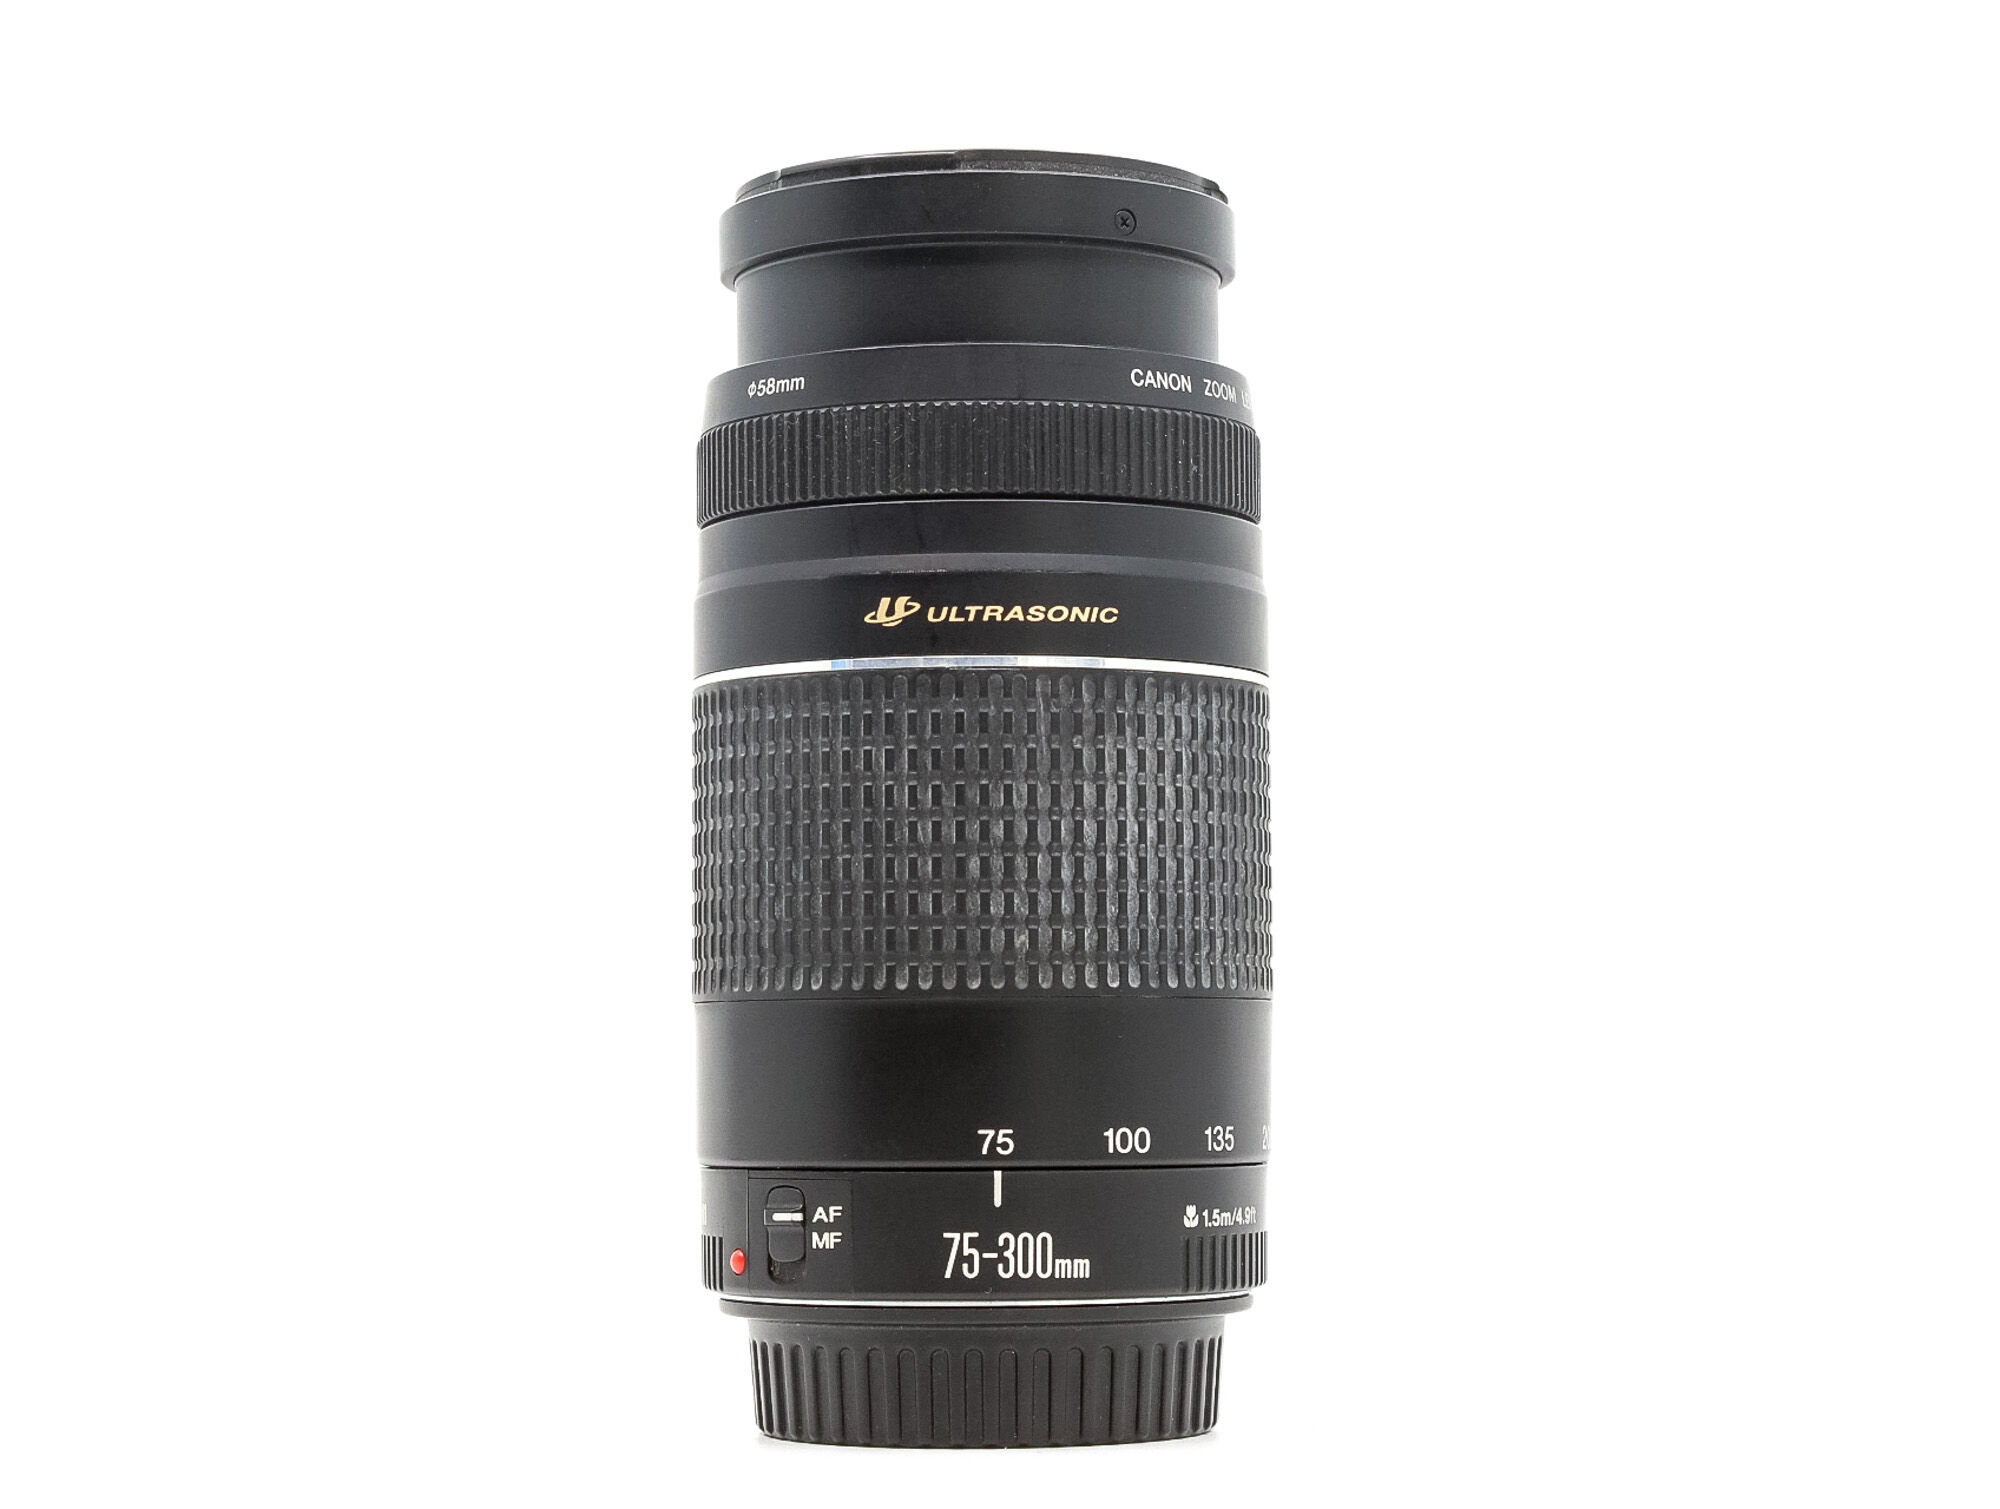 canon ef 75-300mm f/4-5.6 iii usm (condition: well used)